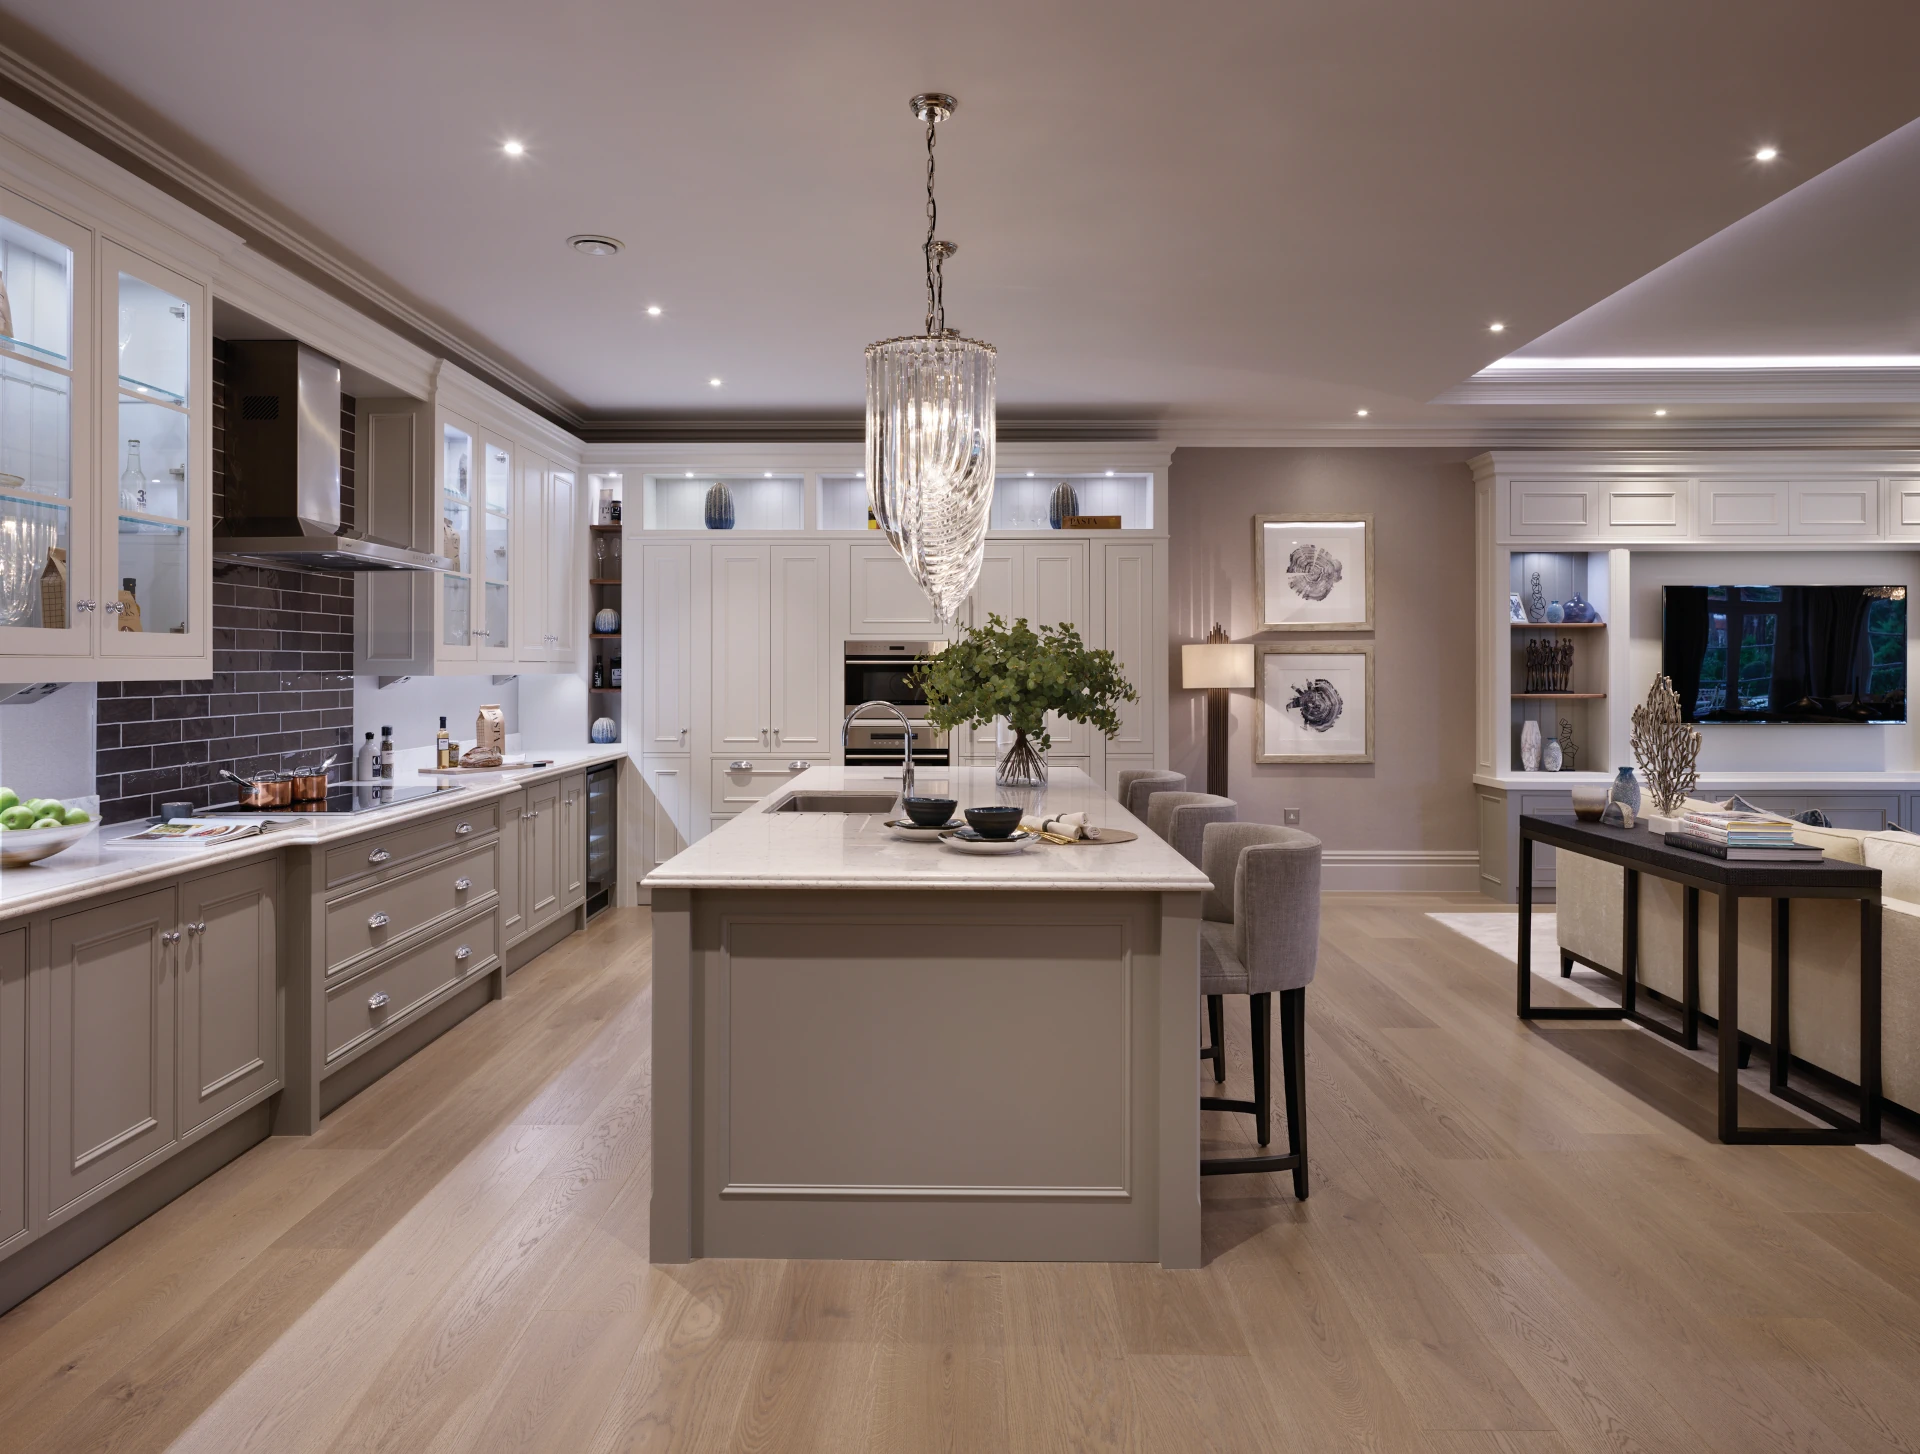 Classic neutral kitchen with island and hanging lighting above.